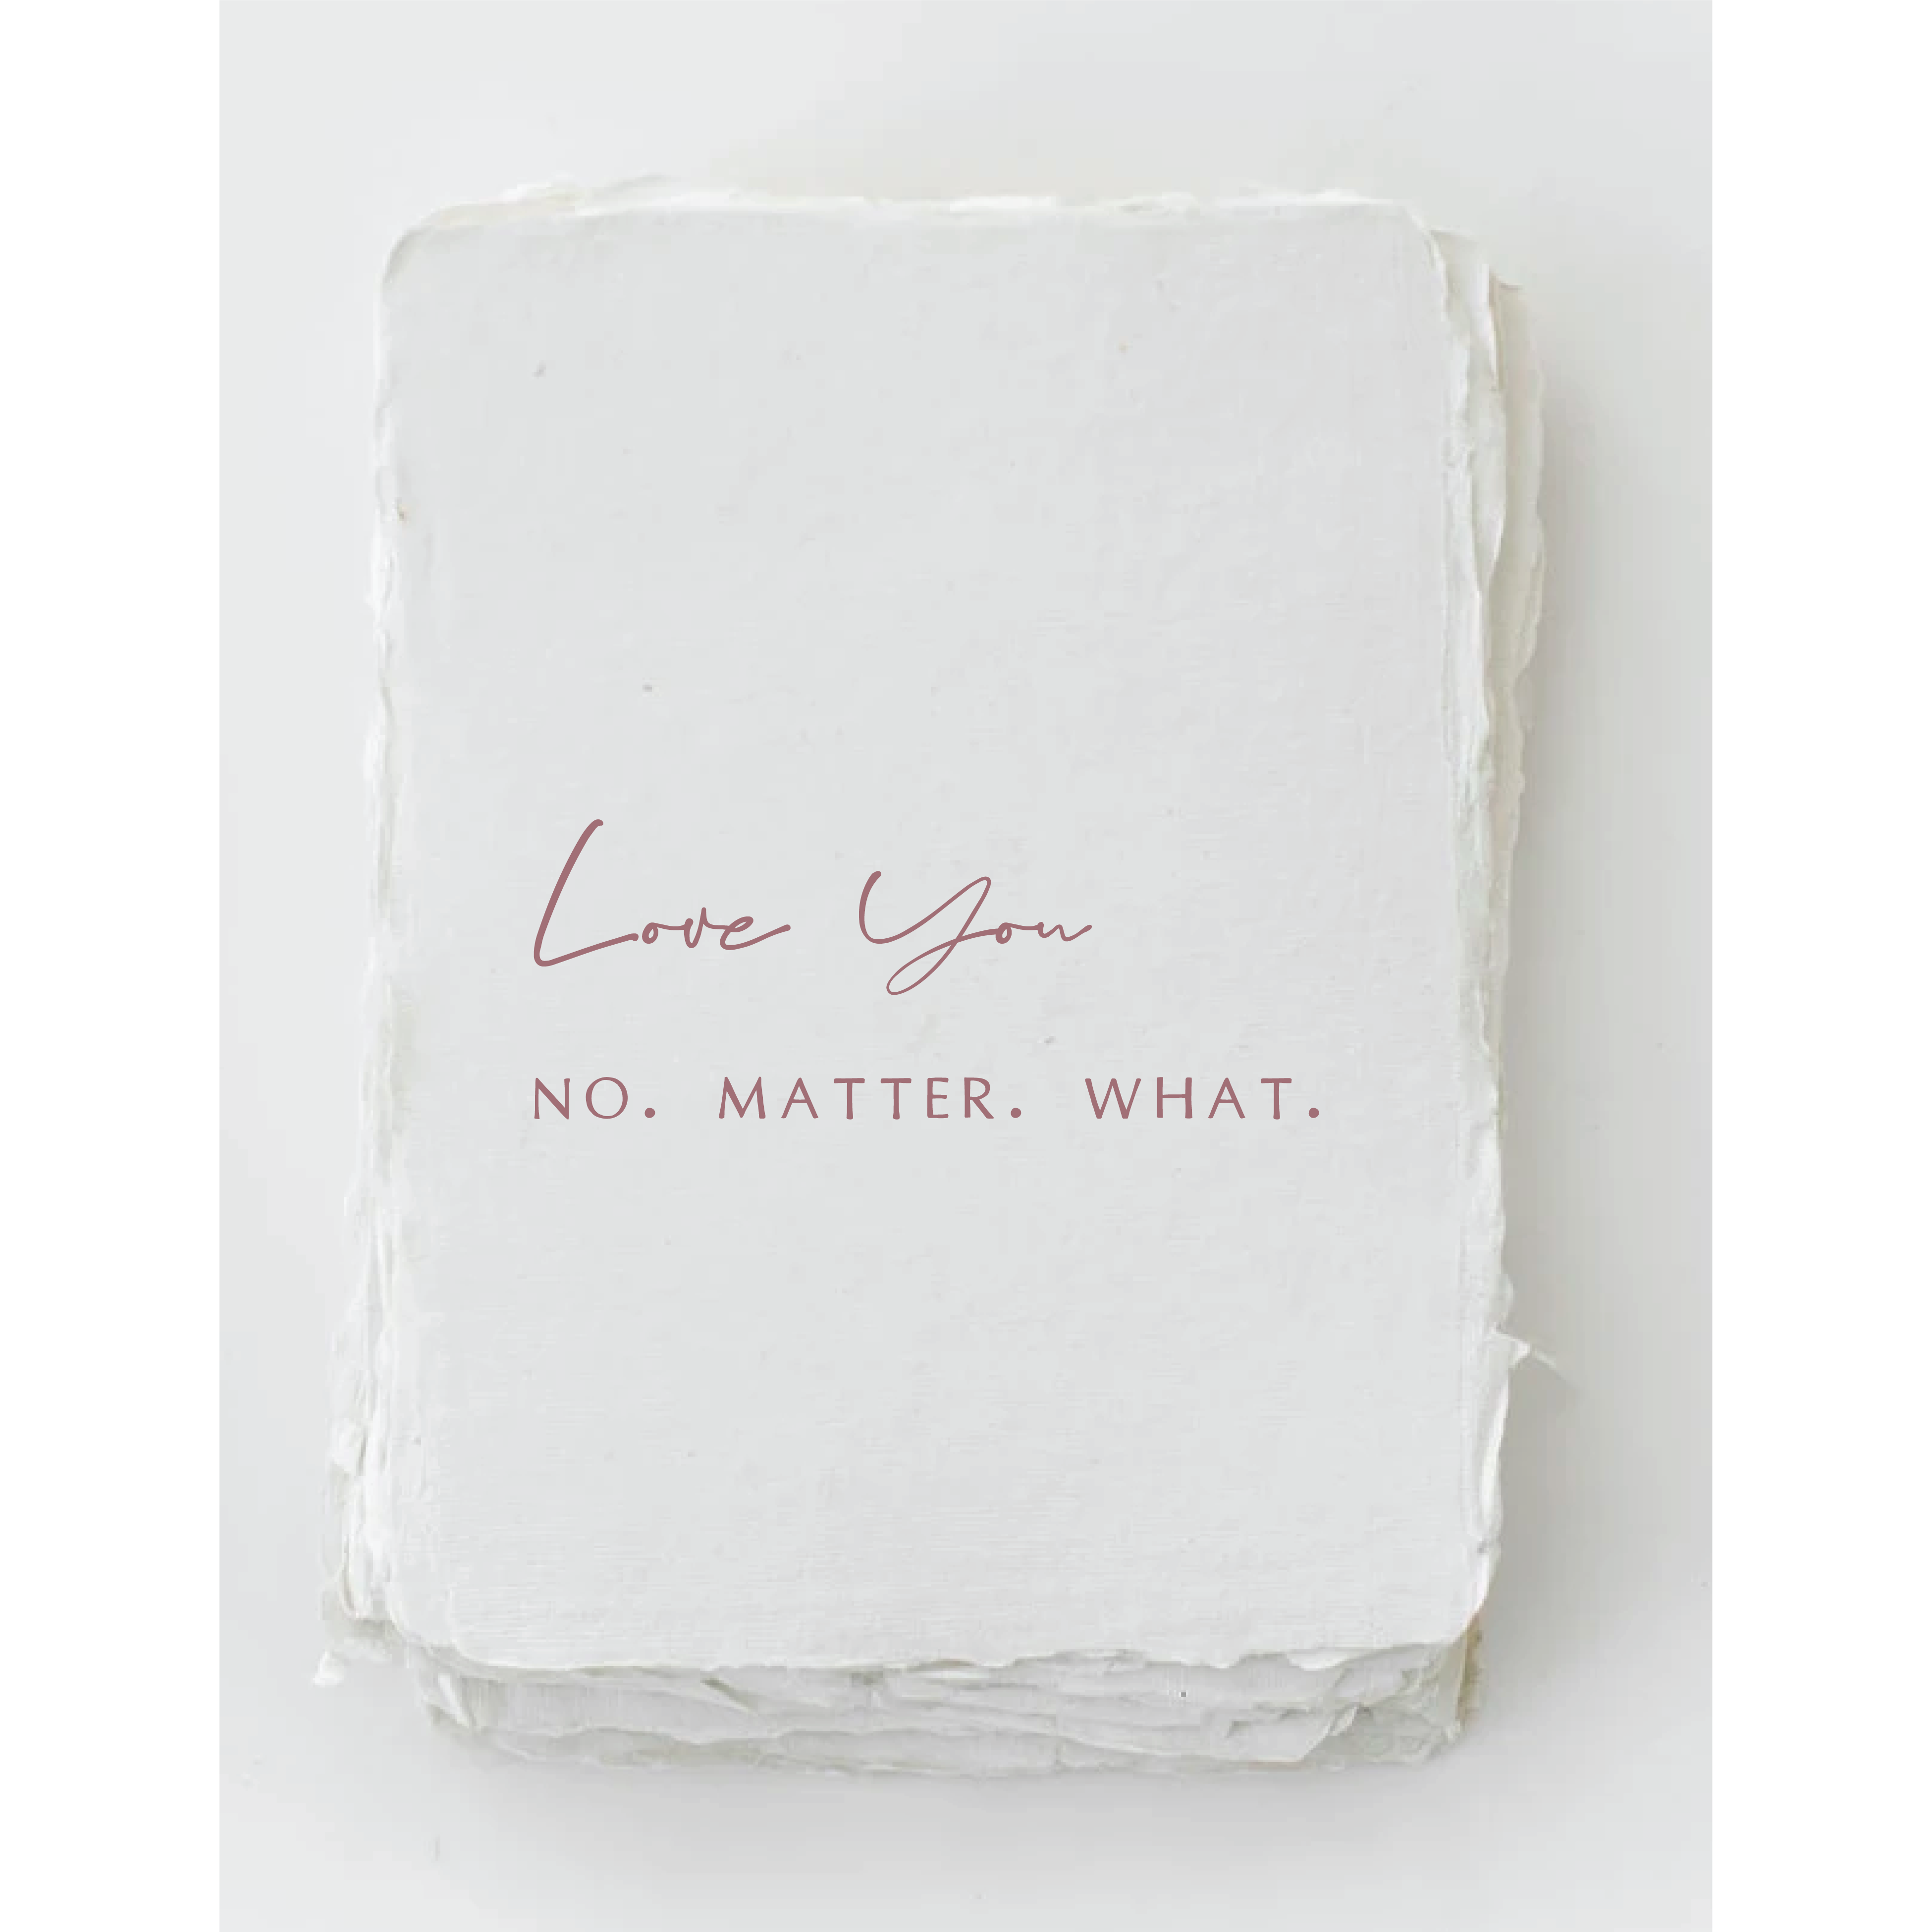 "Love you. No. Matter. What." Love Friend Greeting Card